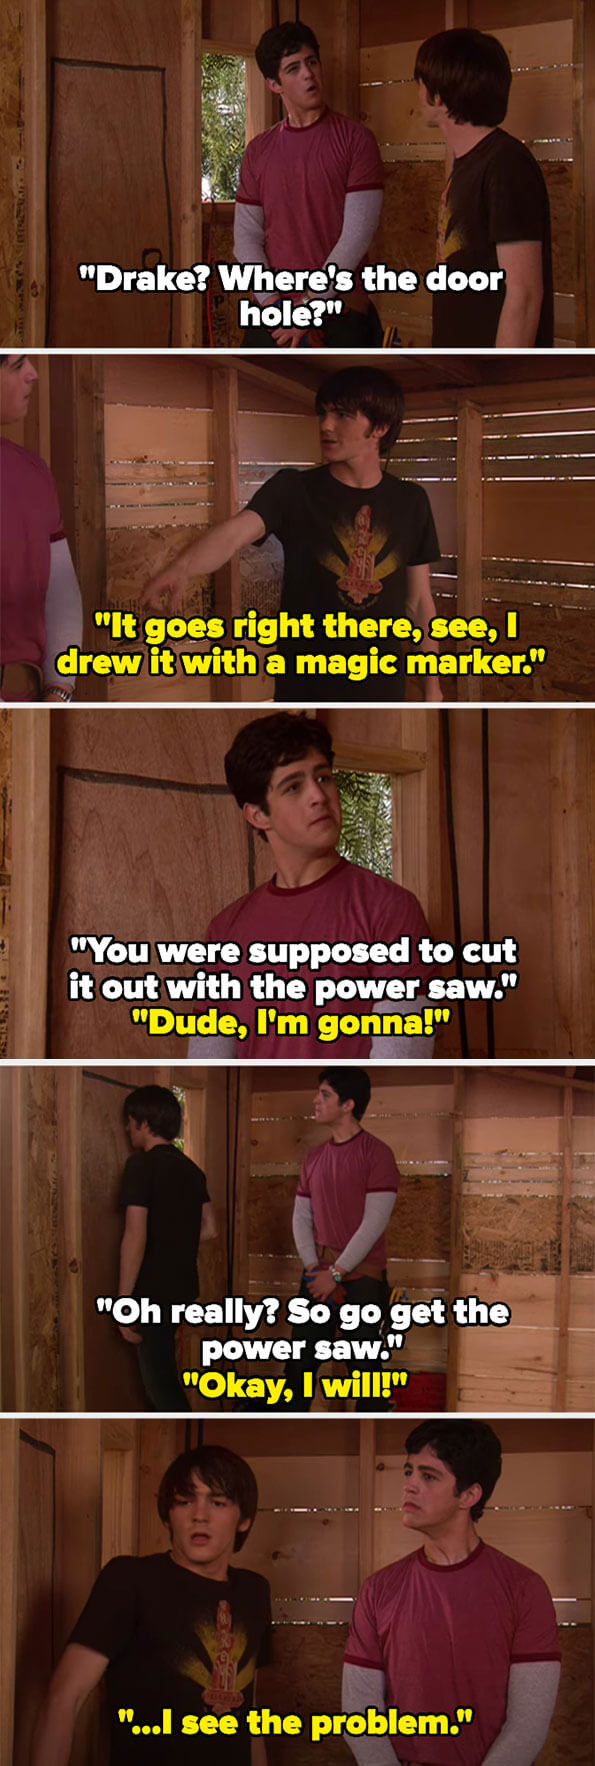 Josh asks Drake where the door is and Josh says he&#x27;s going to cut it with the power saw so Josh tells him to go get it, but the door is just drawn on, so Drake can&#x27;t leave and realizes what Josh is saying